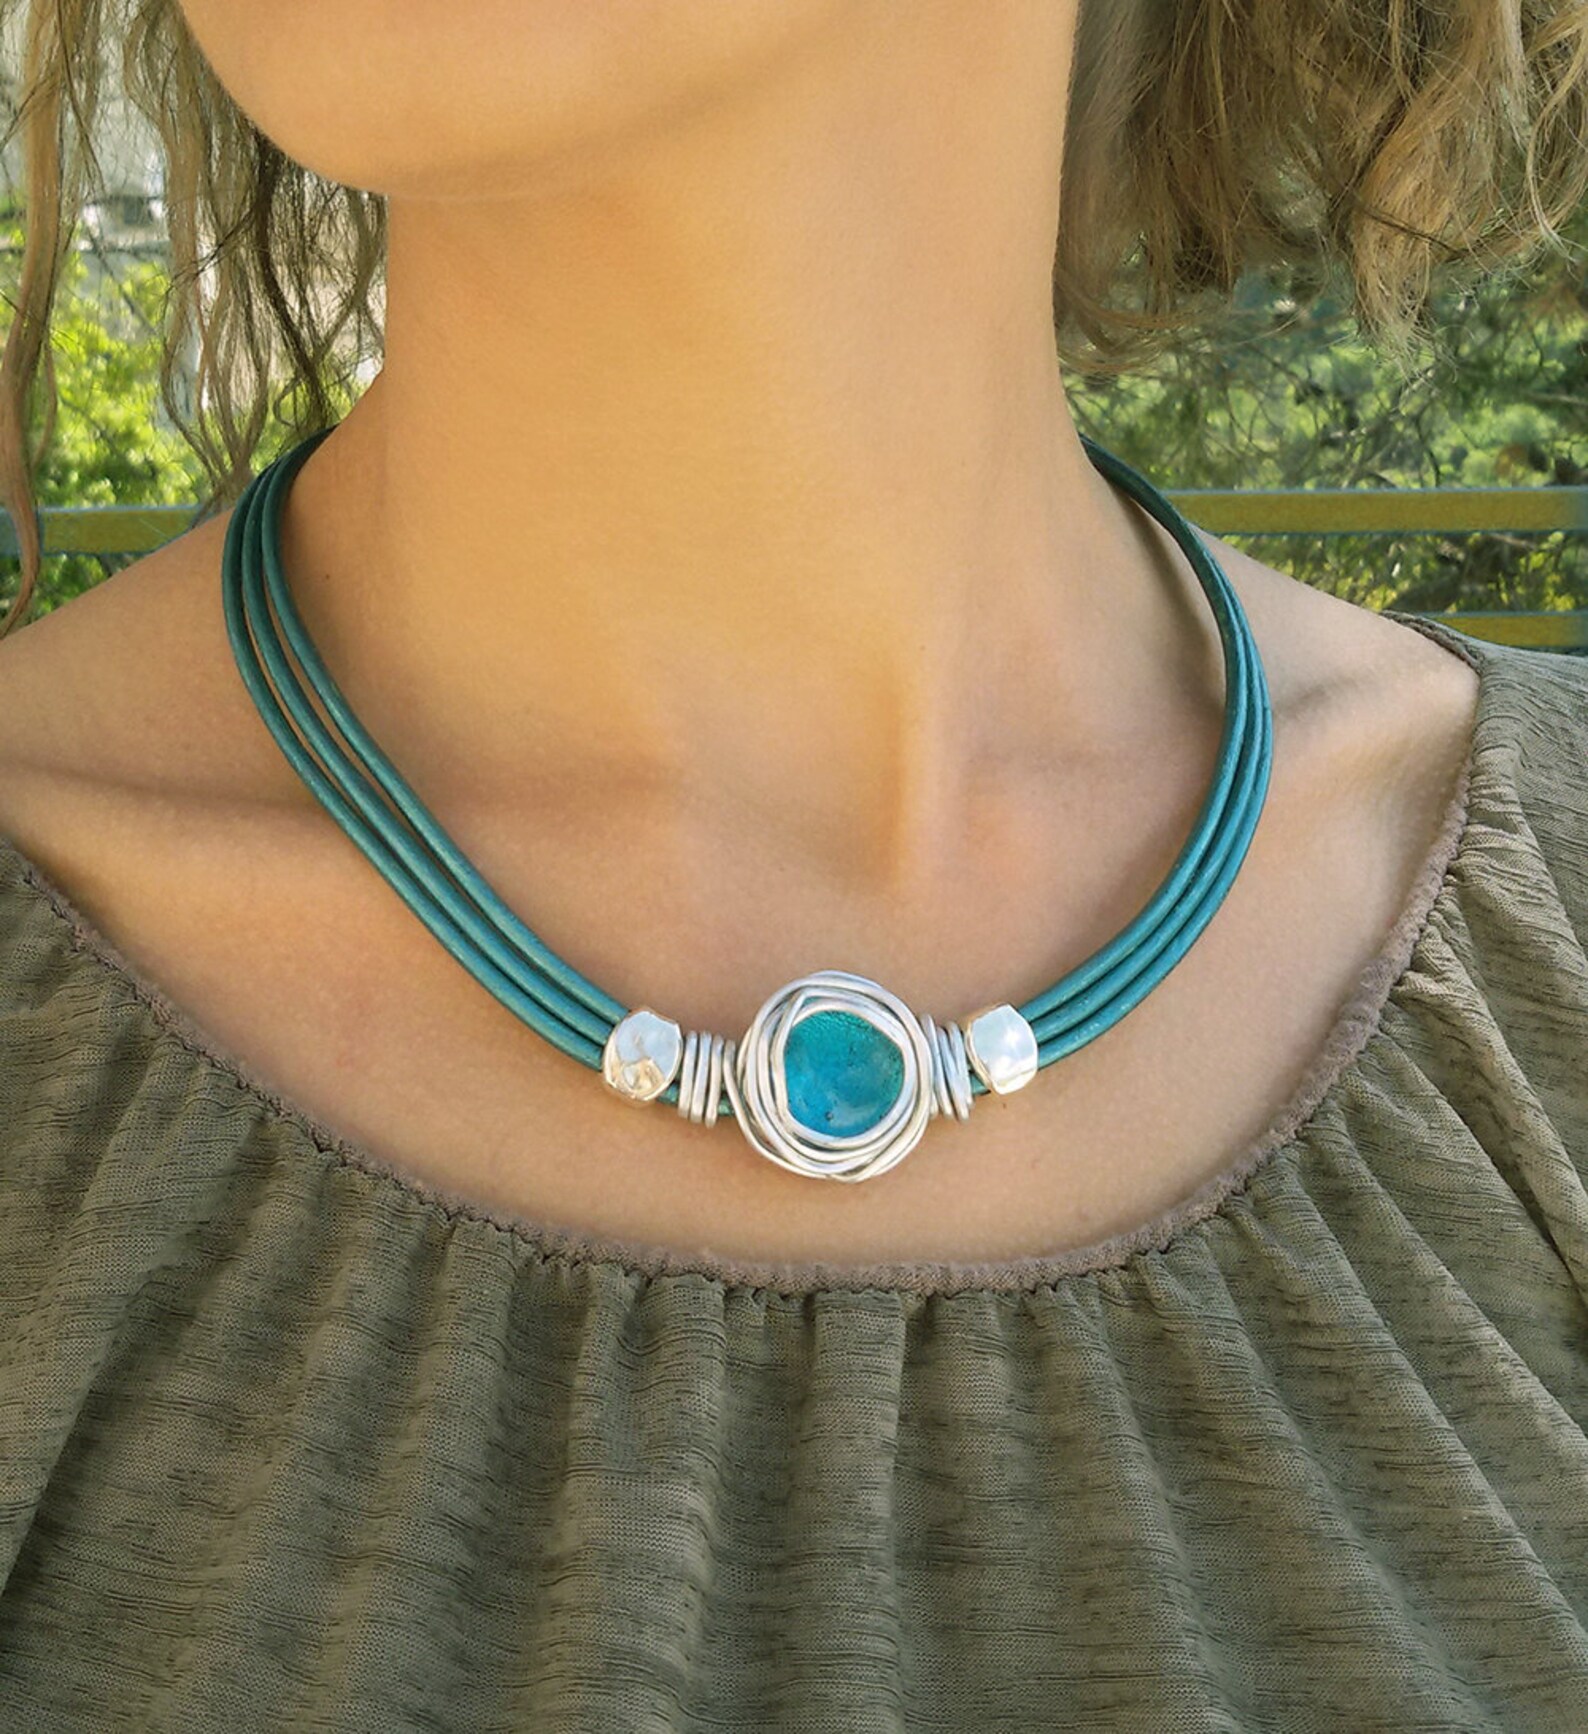 Turquoise Necklace Leather Necklace Choker Necklace Etsy